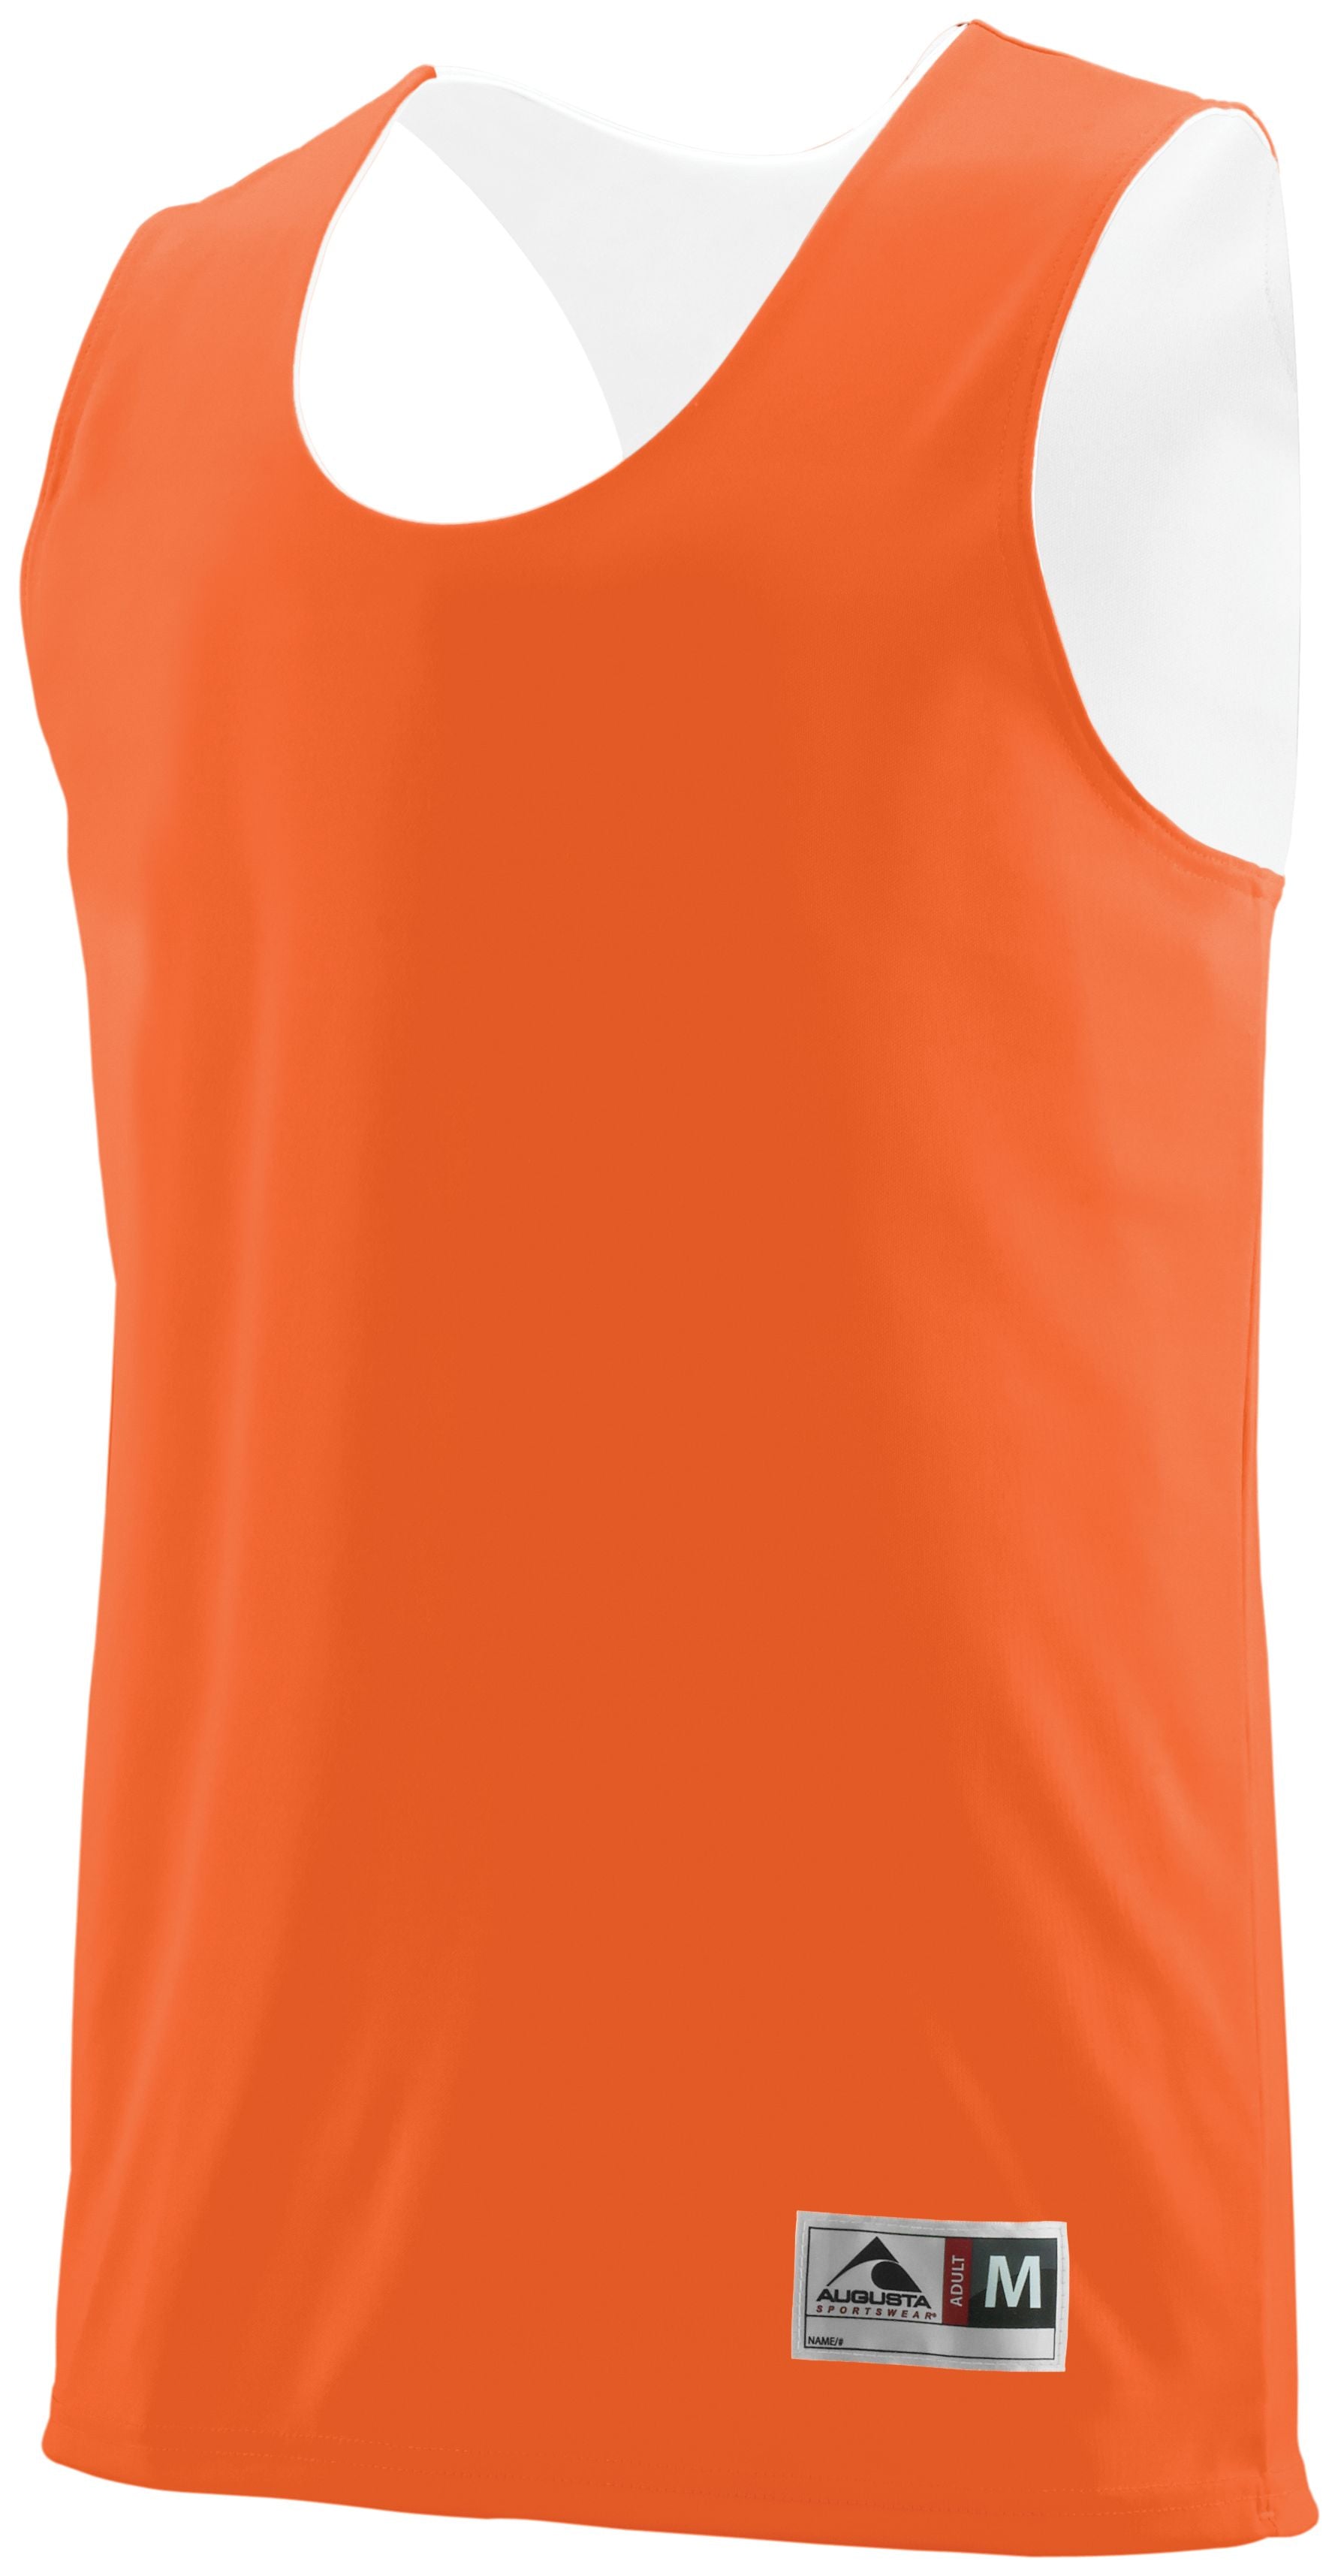 Augusta Sportswear Youth Reversible Wicking Tank in Orange/White  -Part of the Youth, Youth-Tank, Augusta-Products, Basketball, Shirts, All-Sports, All-Sports-1 product lines at KanaleyCreations.com